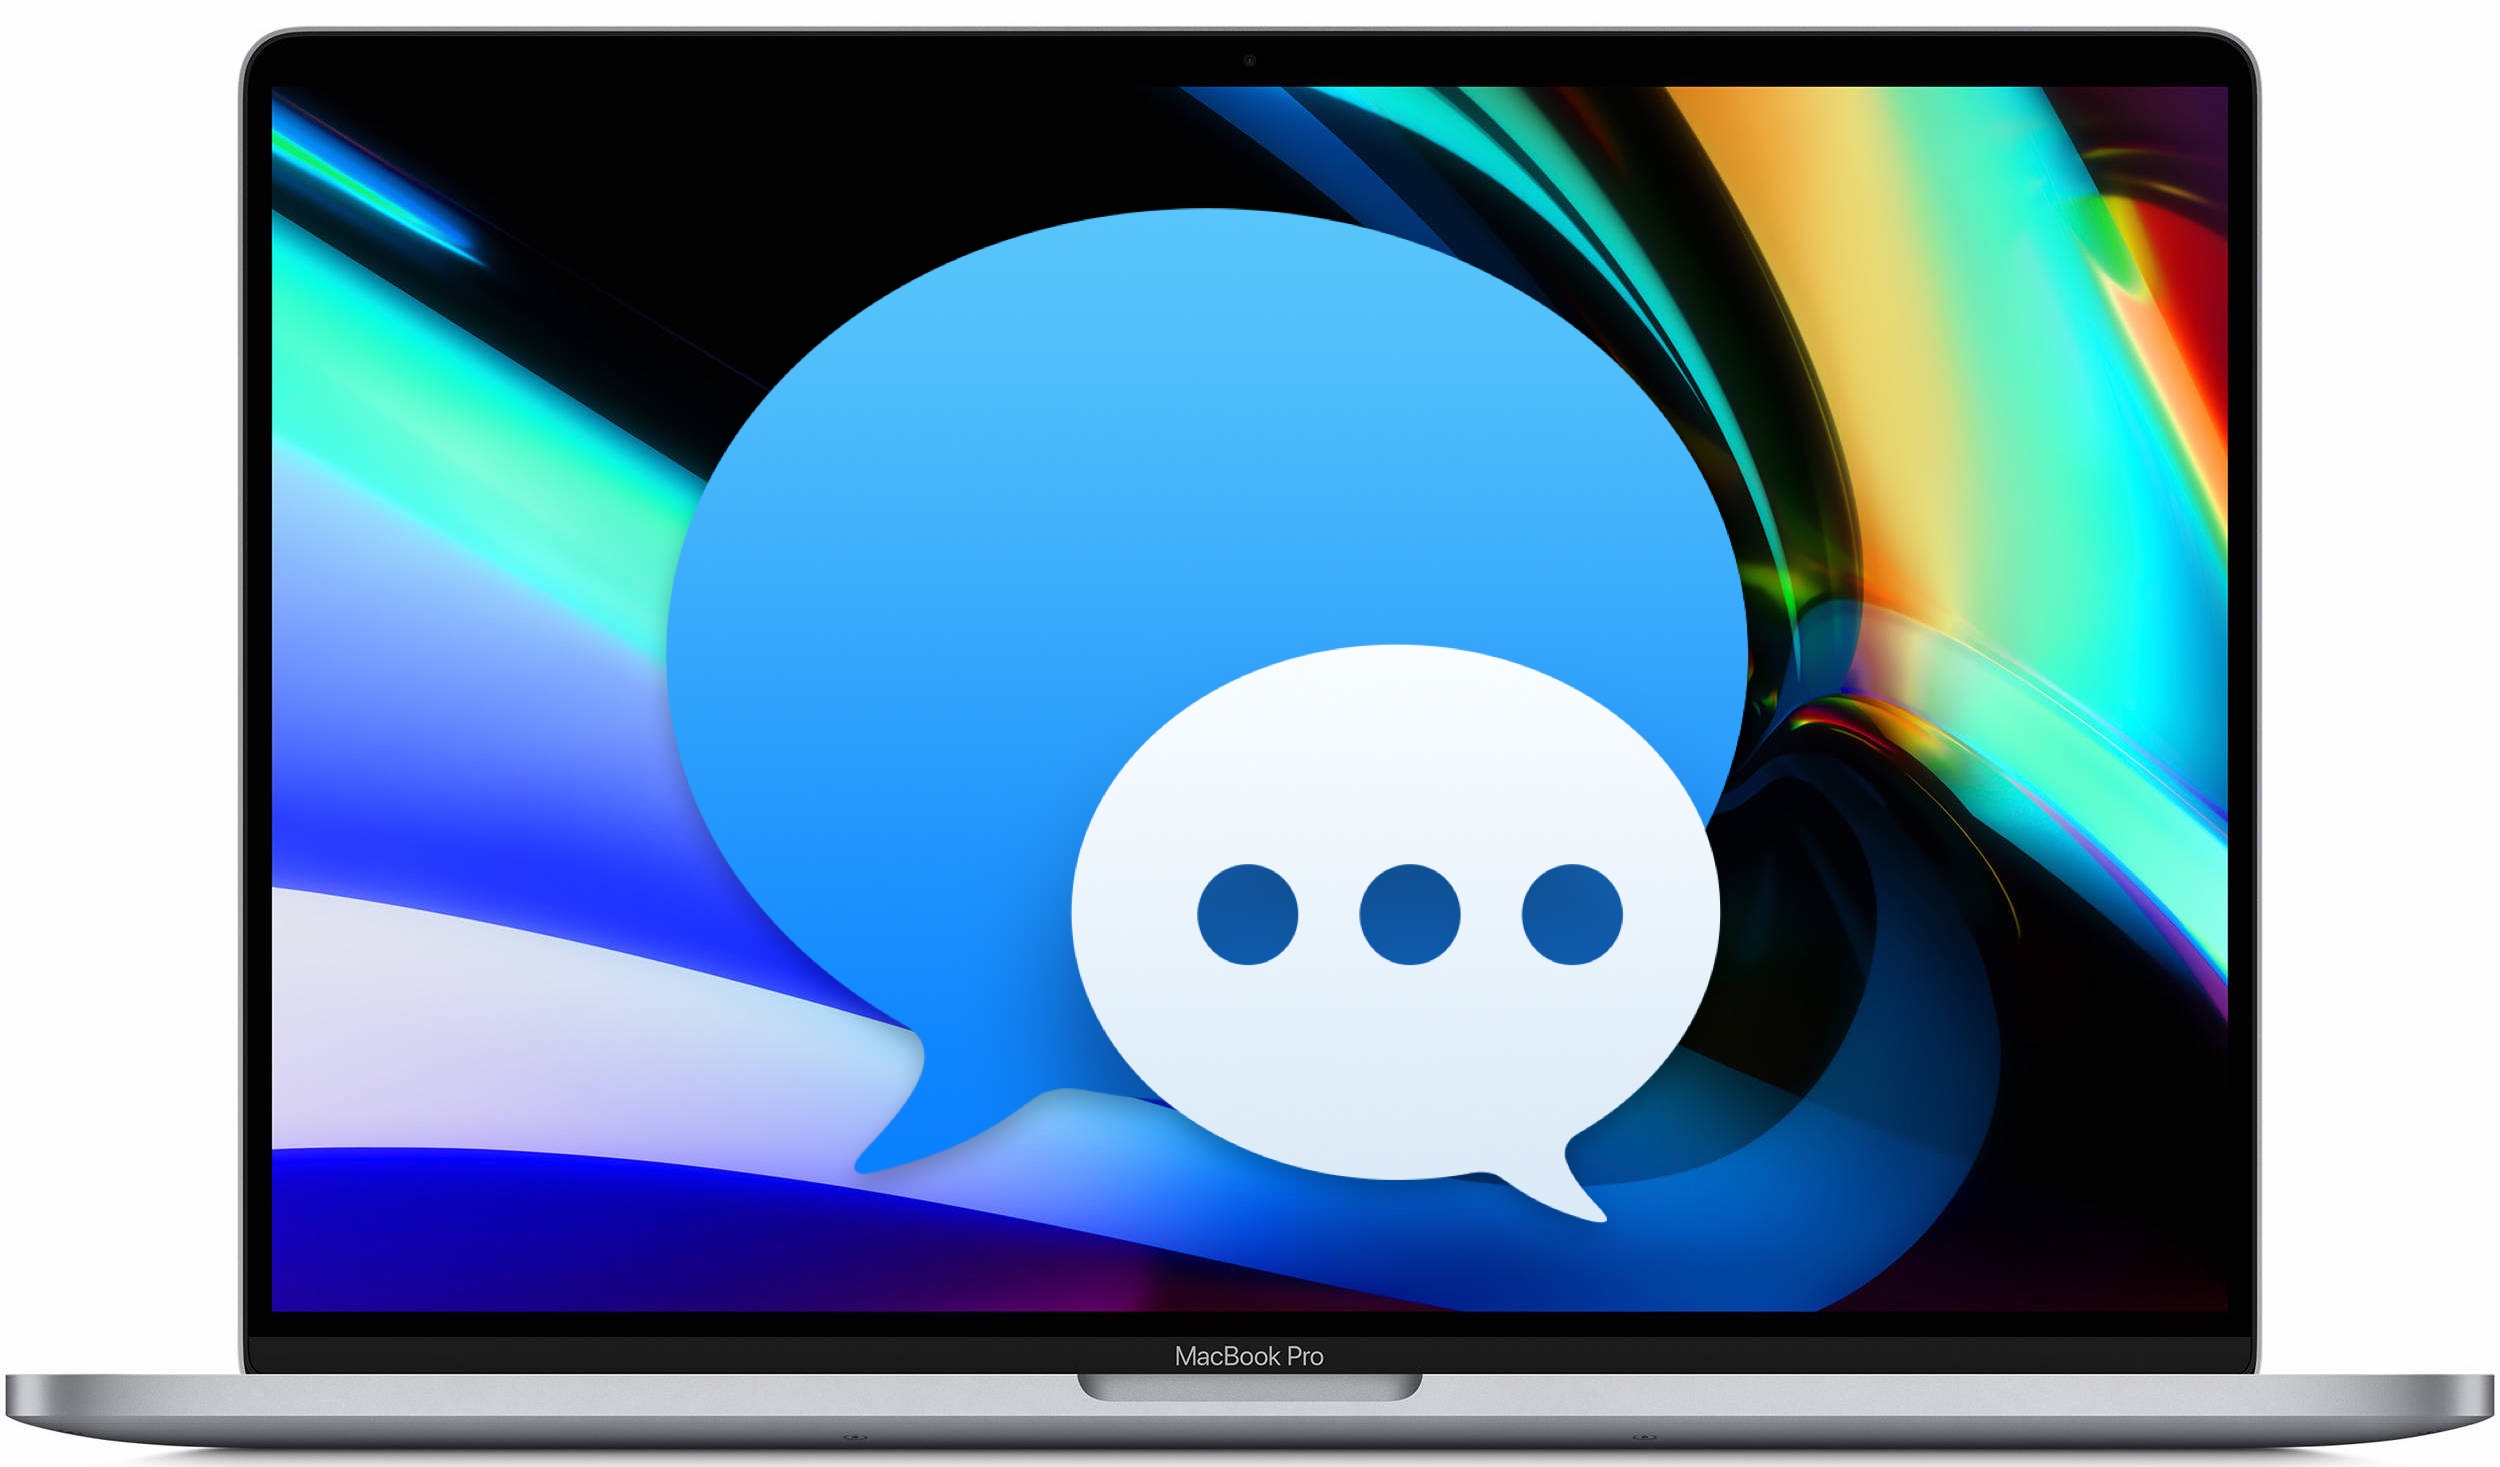 is there a messaging app for android for mac